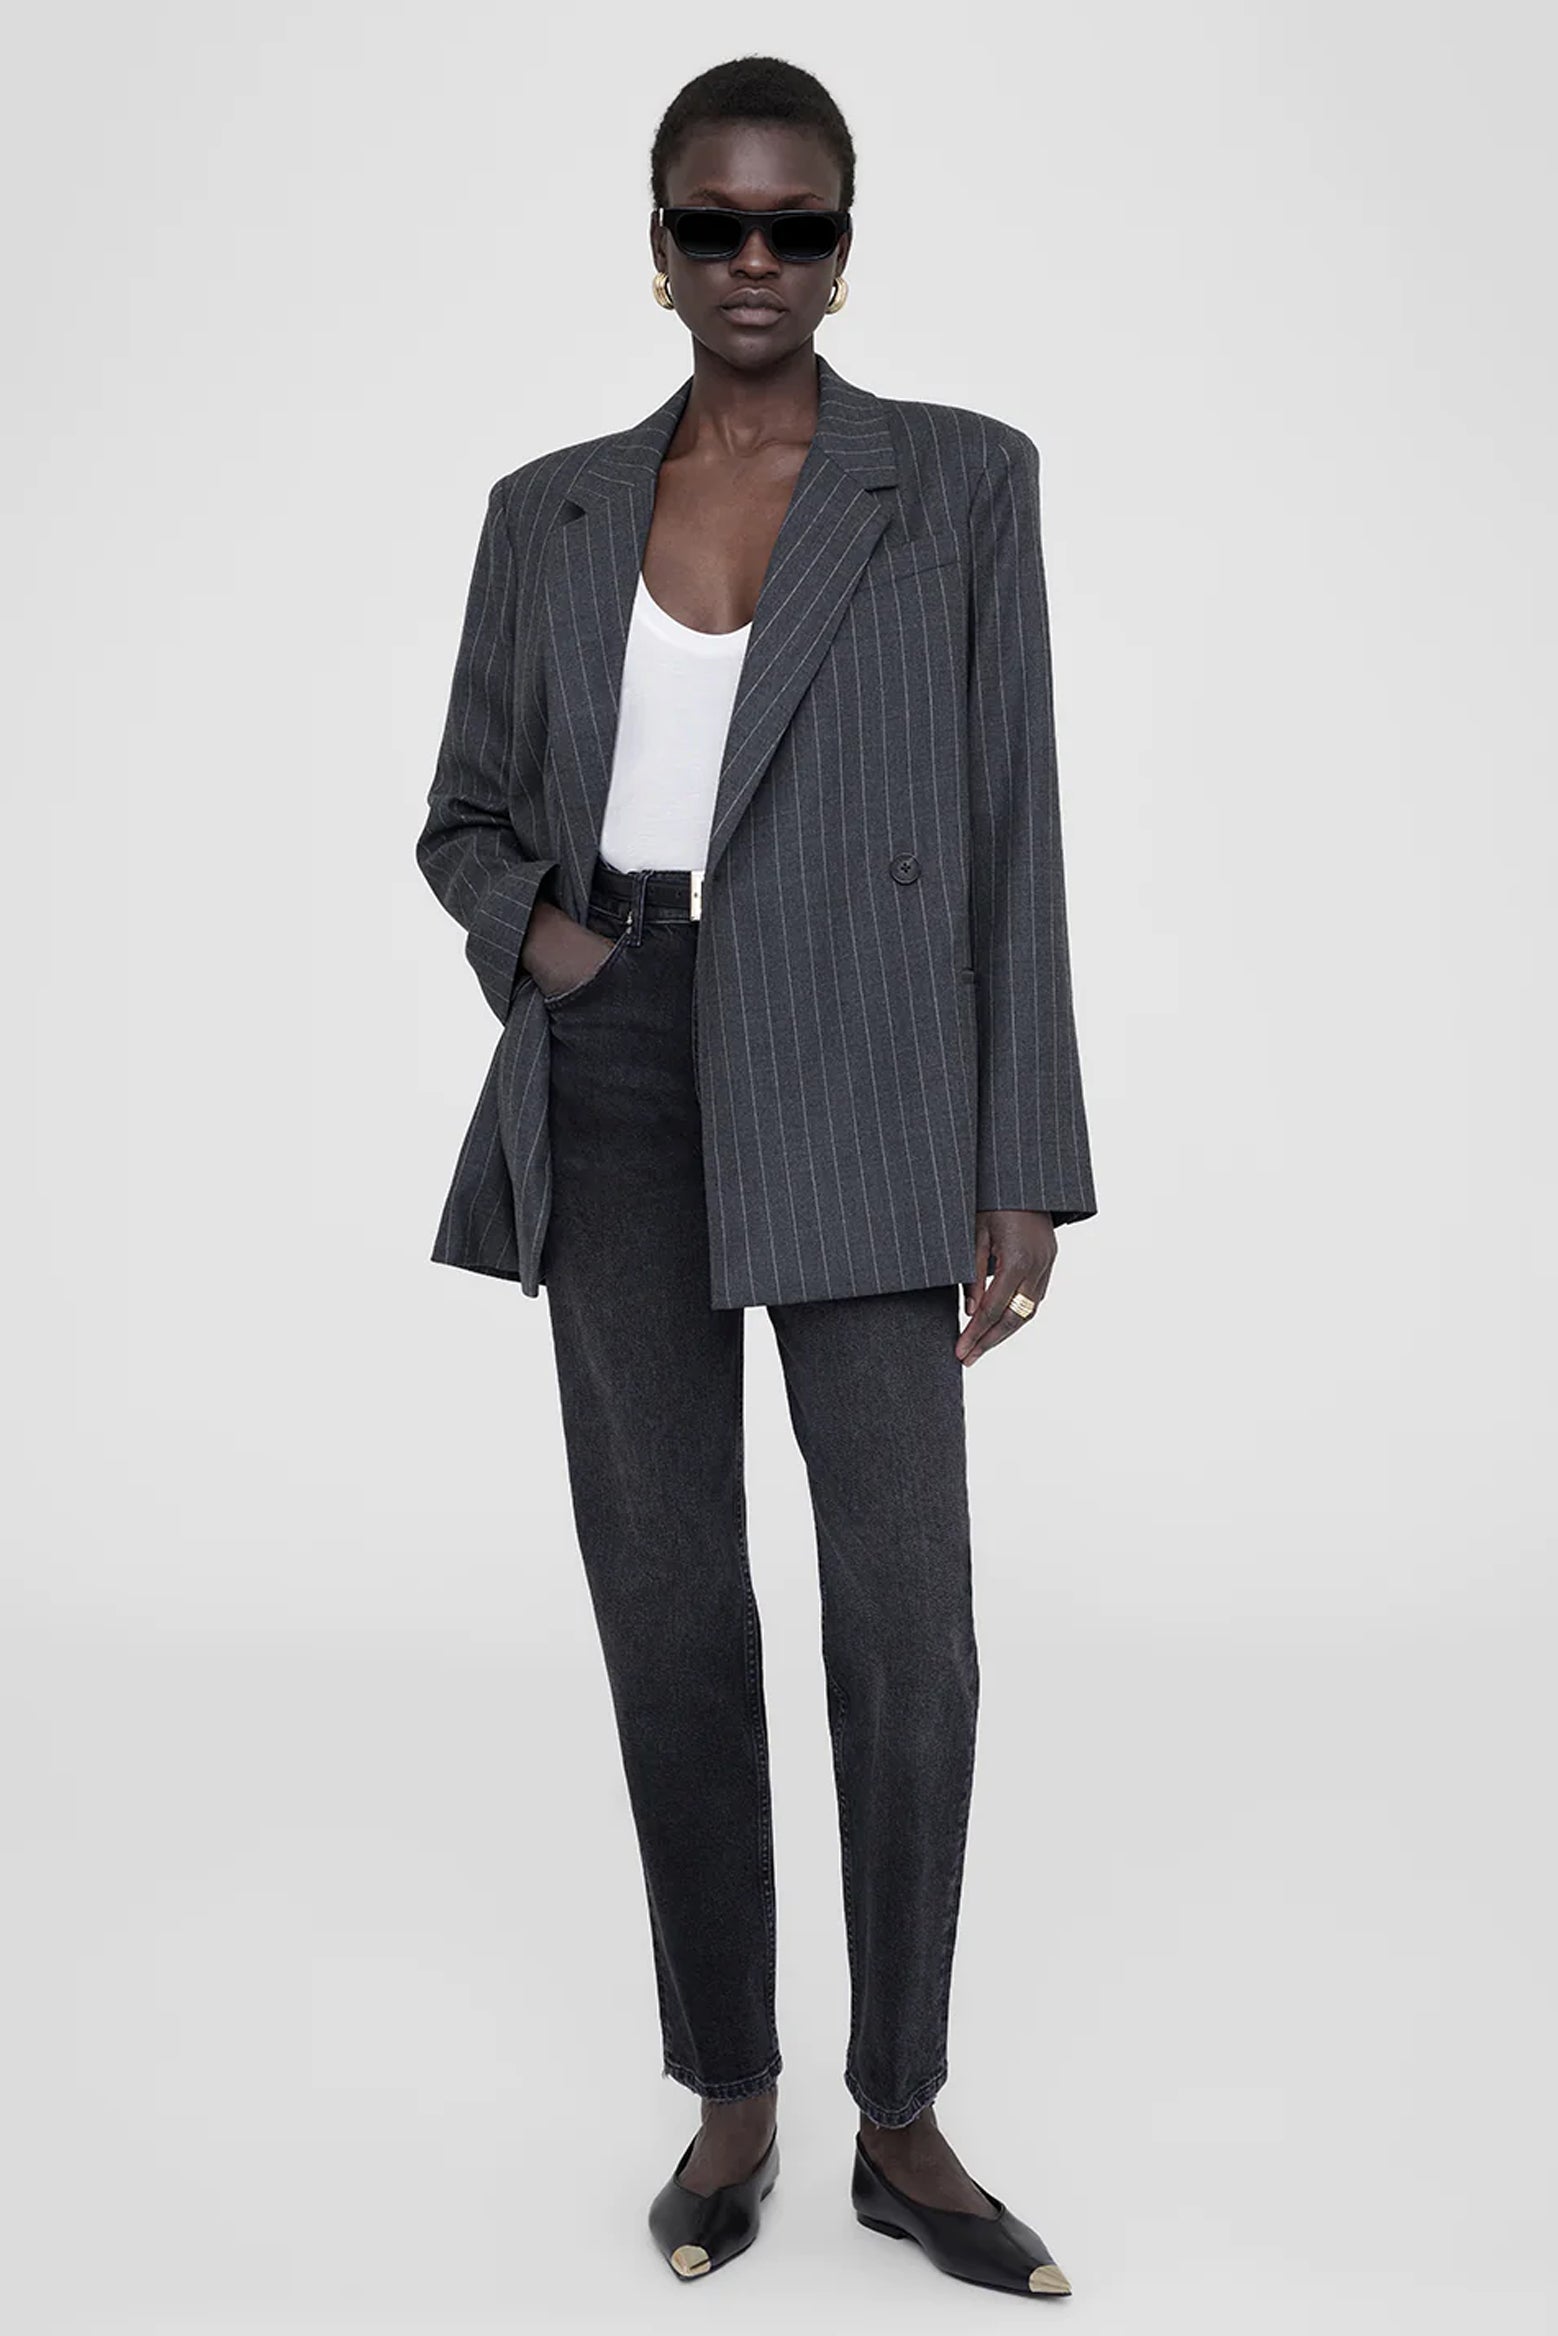 Anine Bing Kaia Blazer in Grey Pinstripe available at The New Trend Australia.